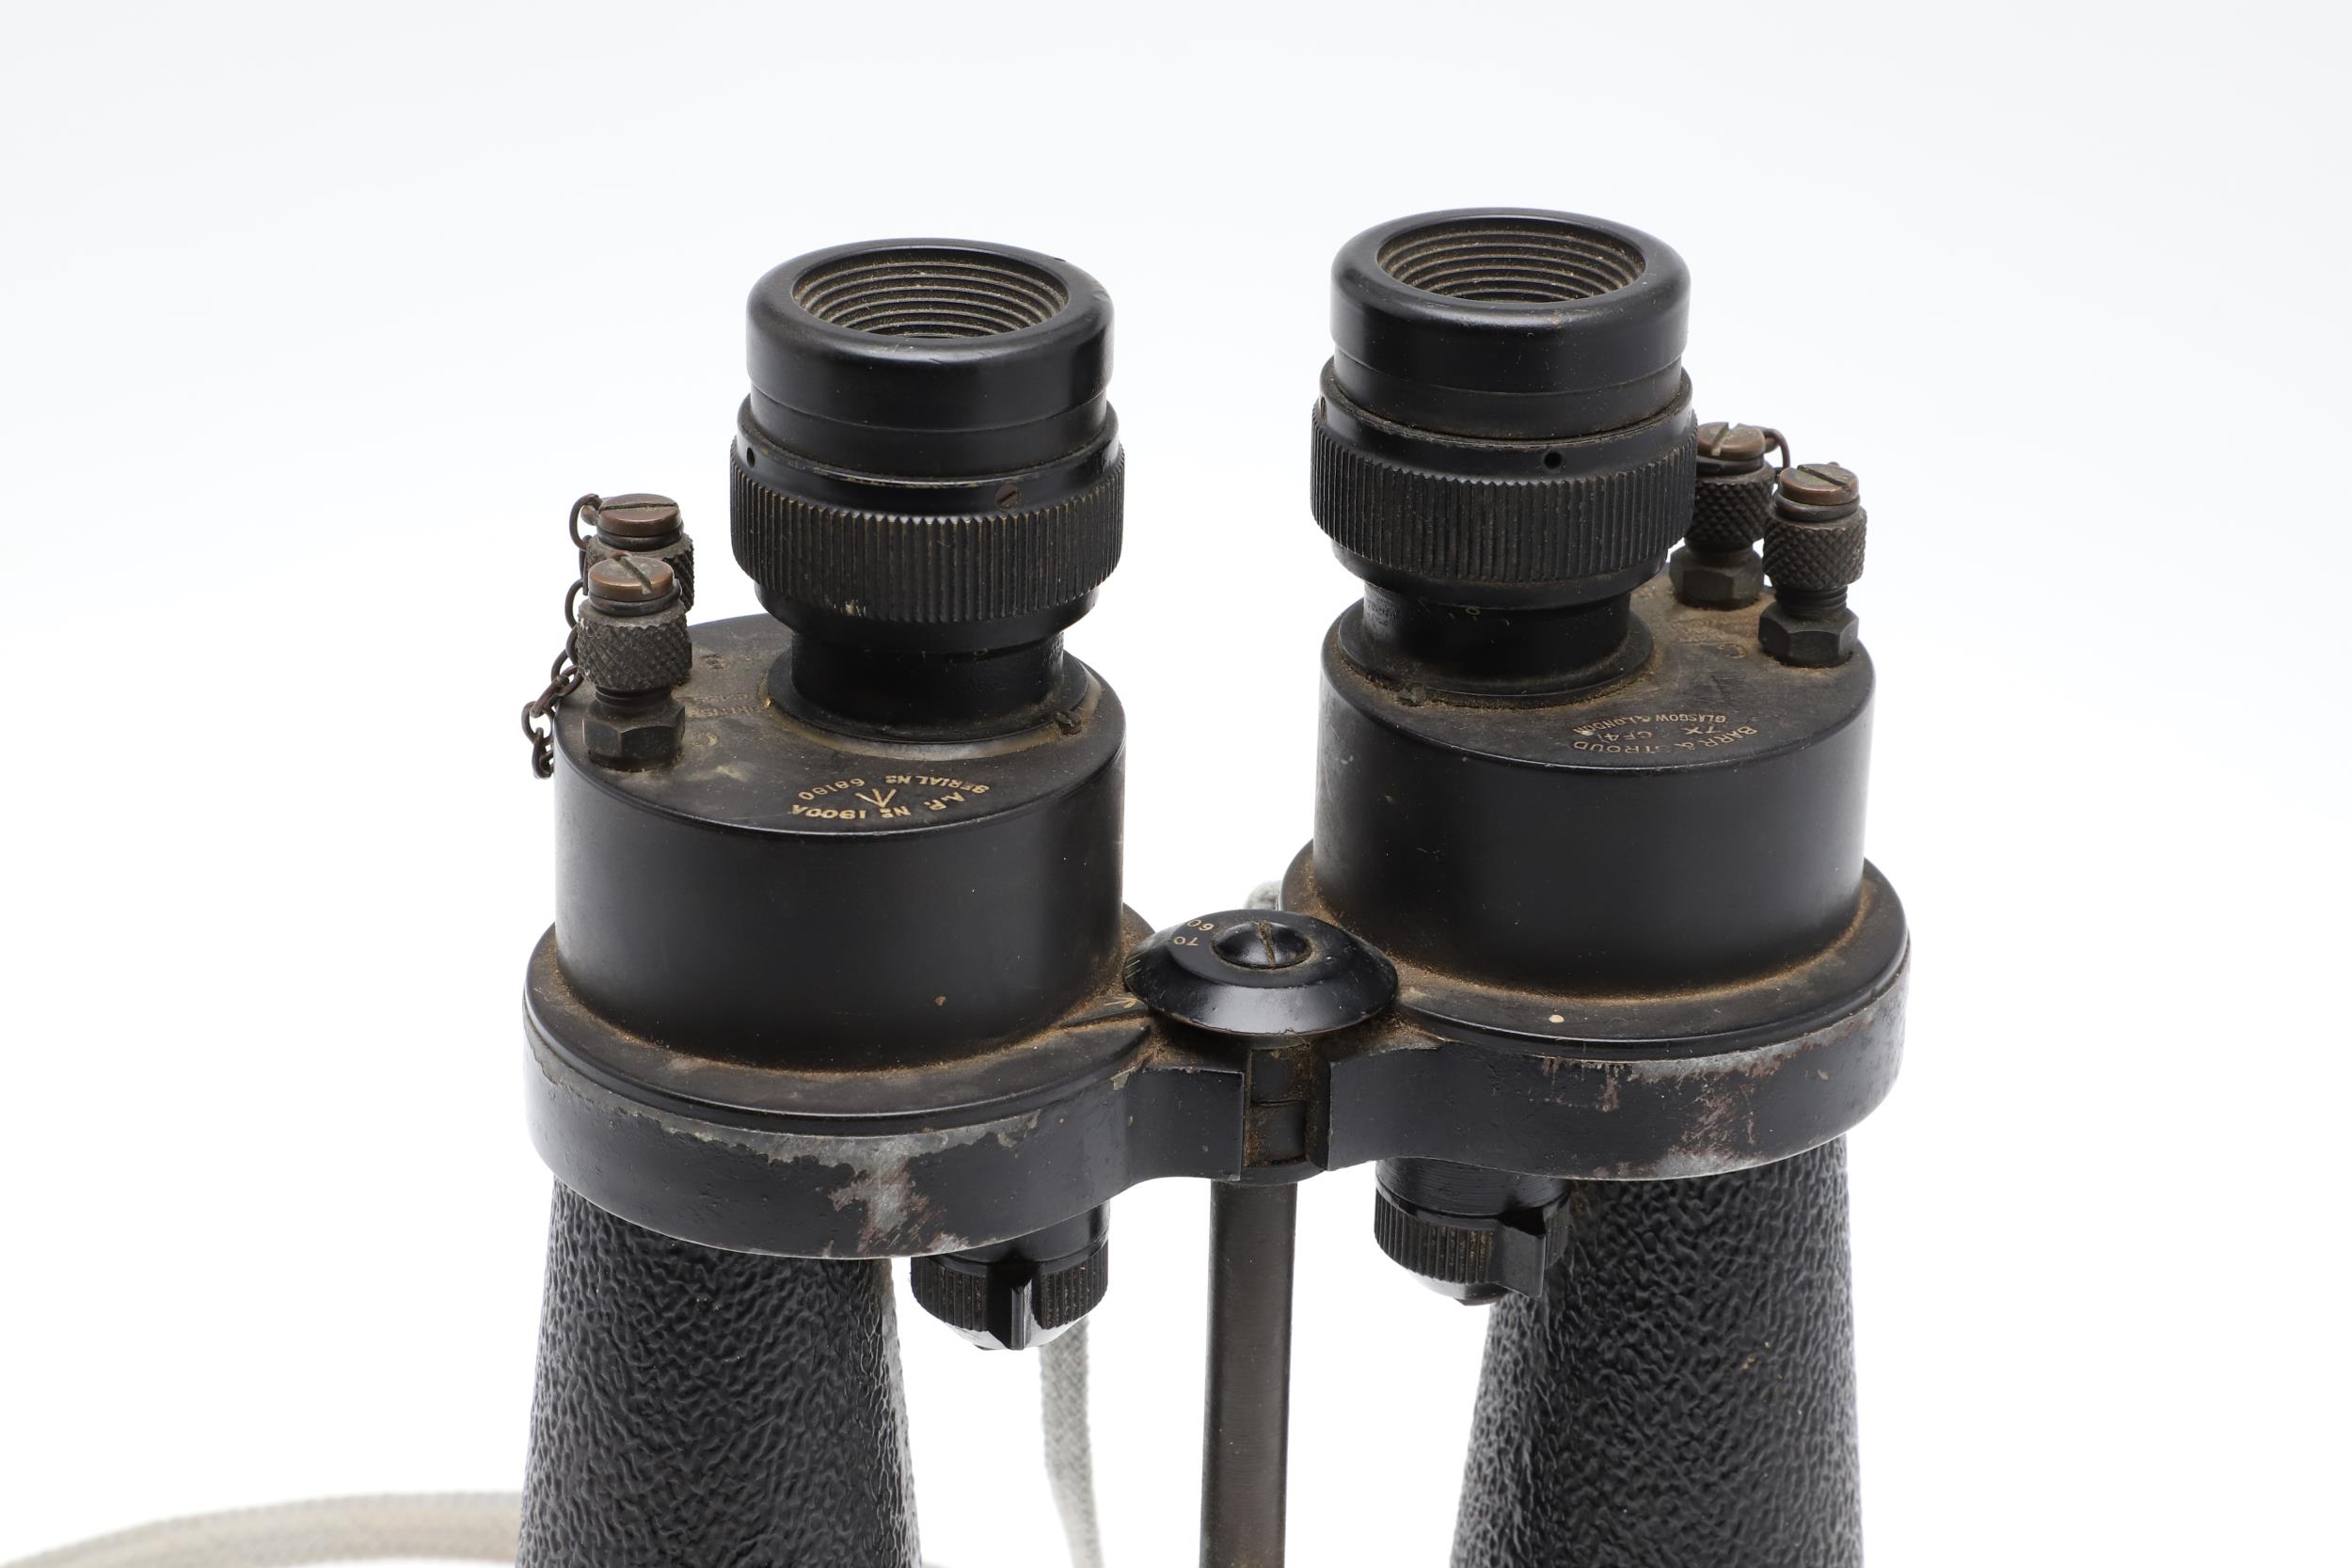 A PAIR OF SECOND WORLD WAR NAVAL BINOCULARS BY BARR AND STROUD. - Image 2 of 12